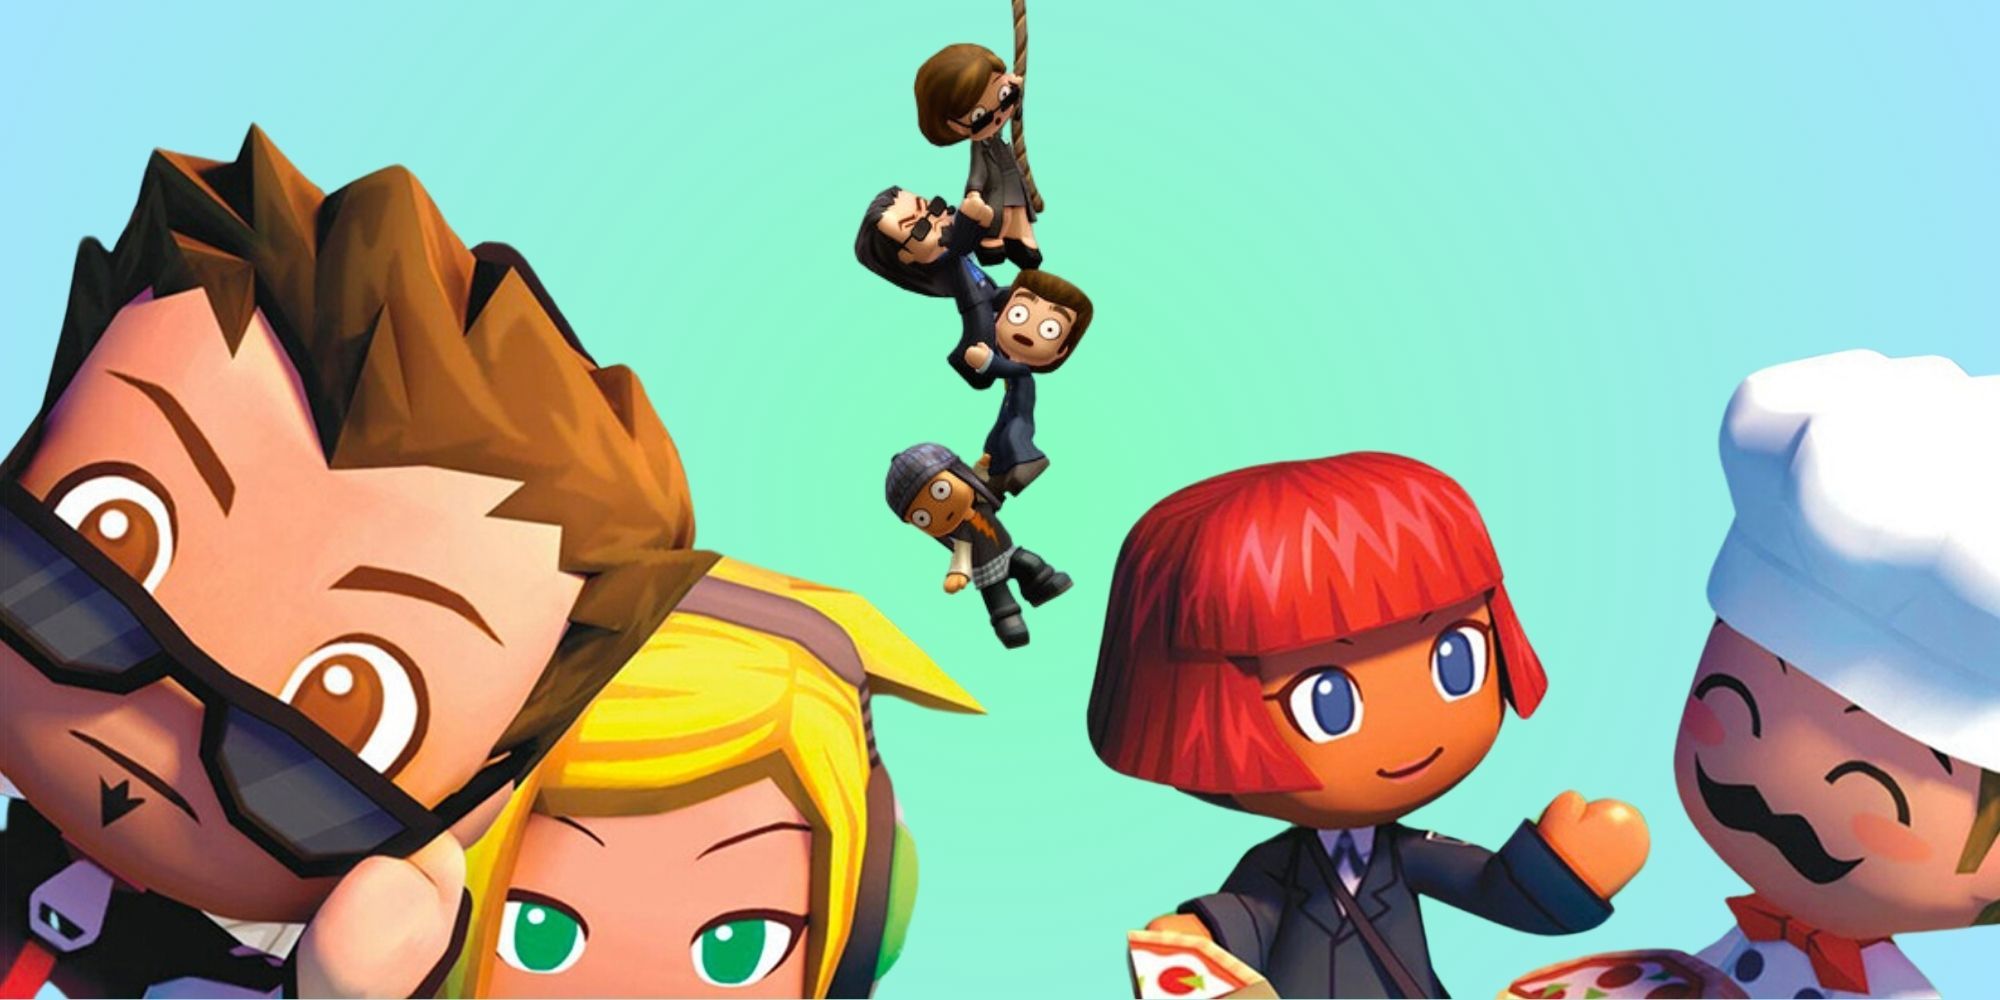 Several MySims characters are shown against a blue and green background.